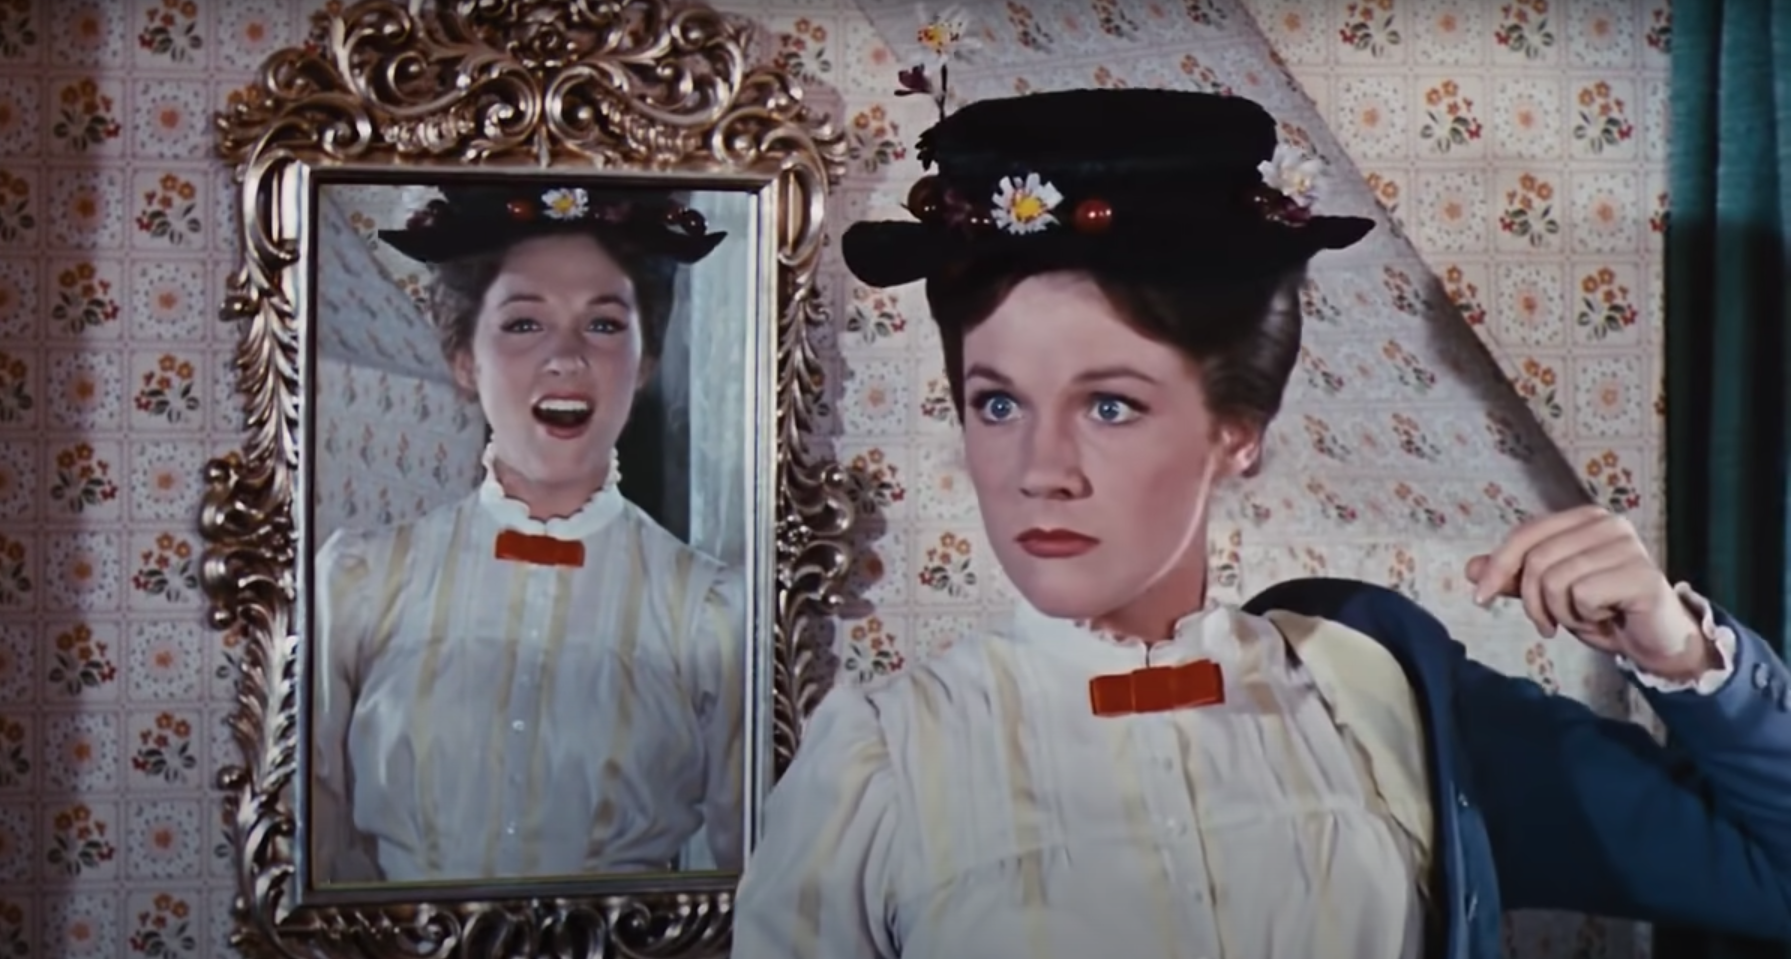 Mary Poppins (Julie Andrews) - Mary Poppins